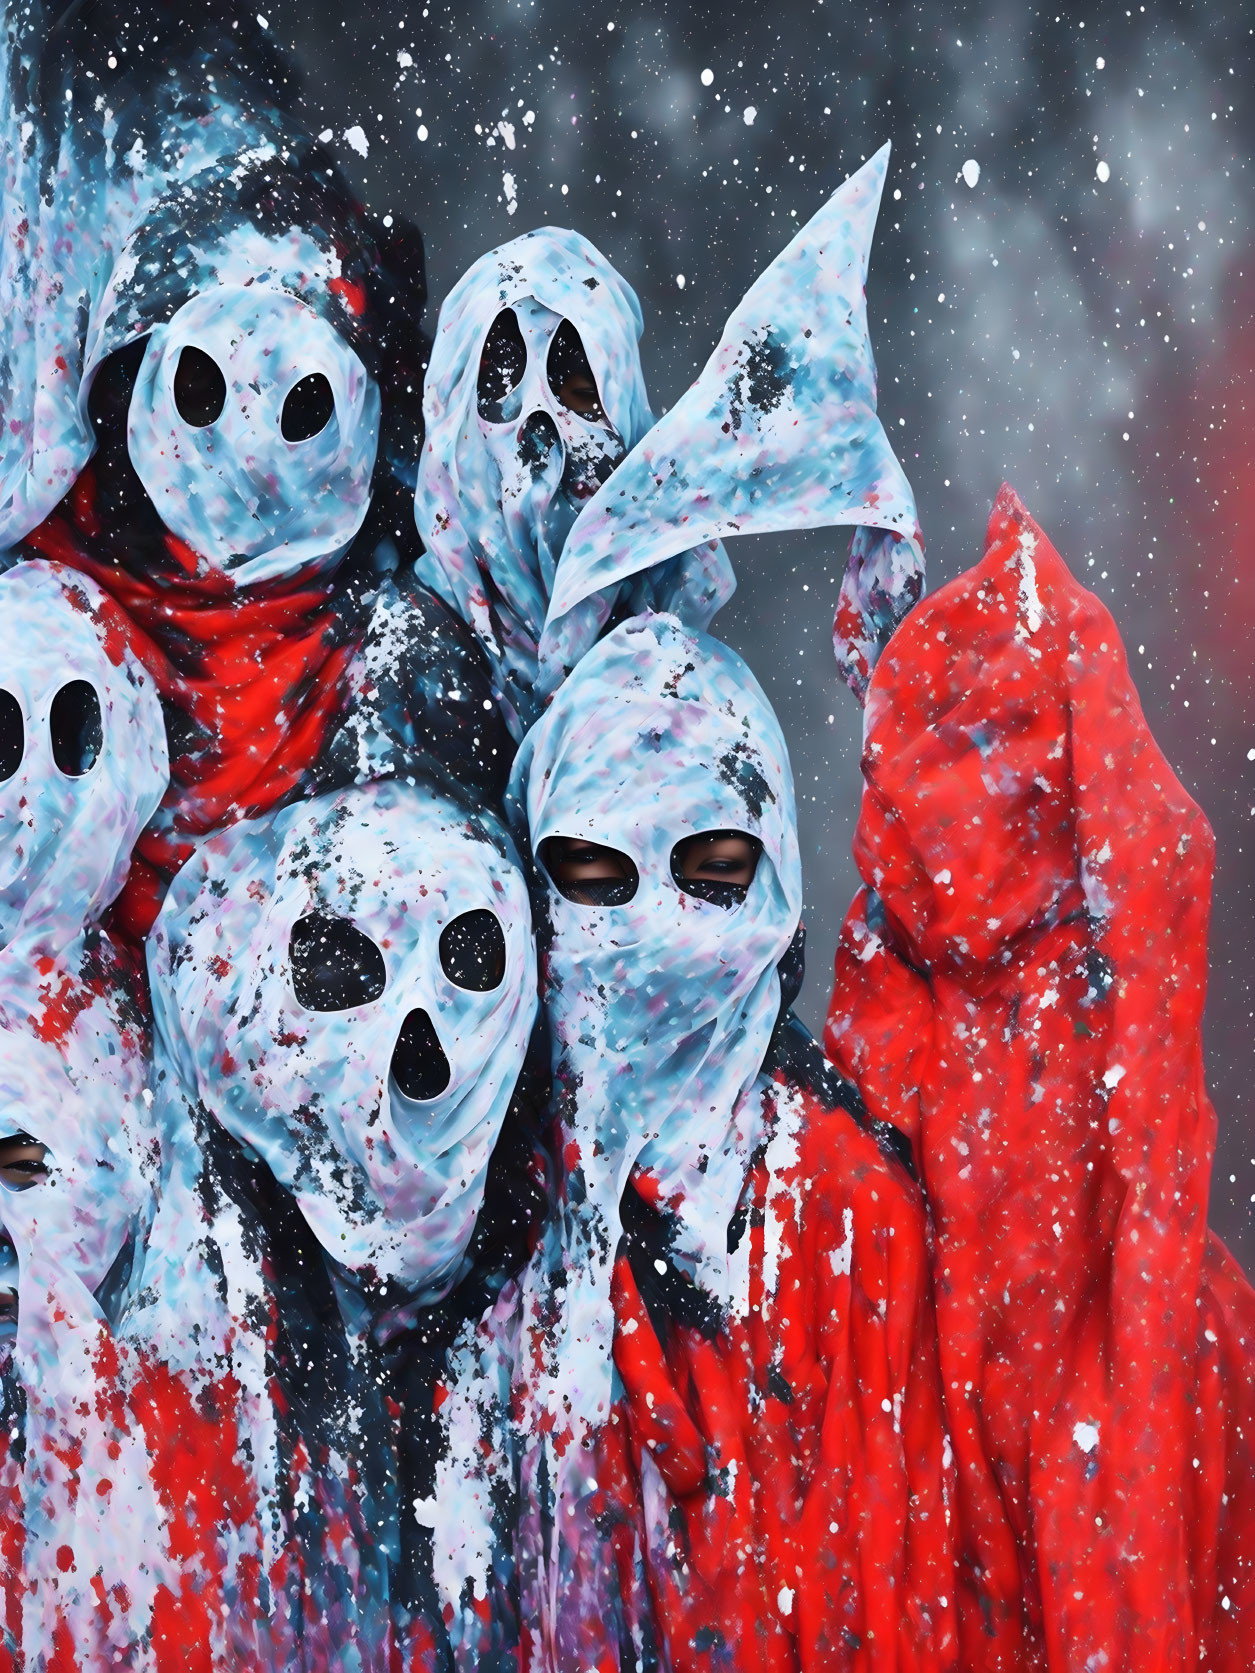 Group of People in Eerie White Masks and Scarlet Cloaks Standing in Snowstorm